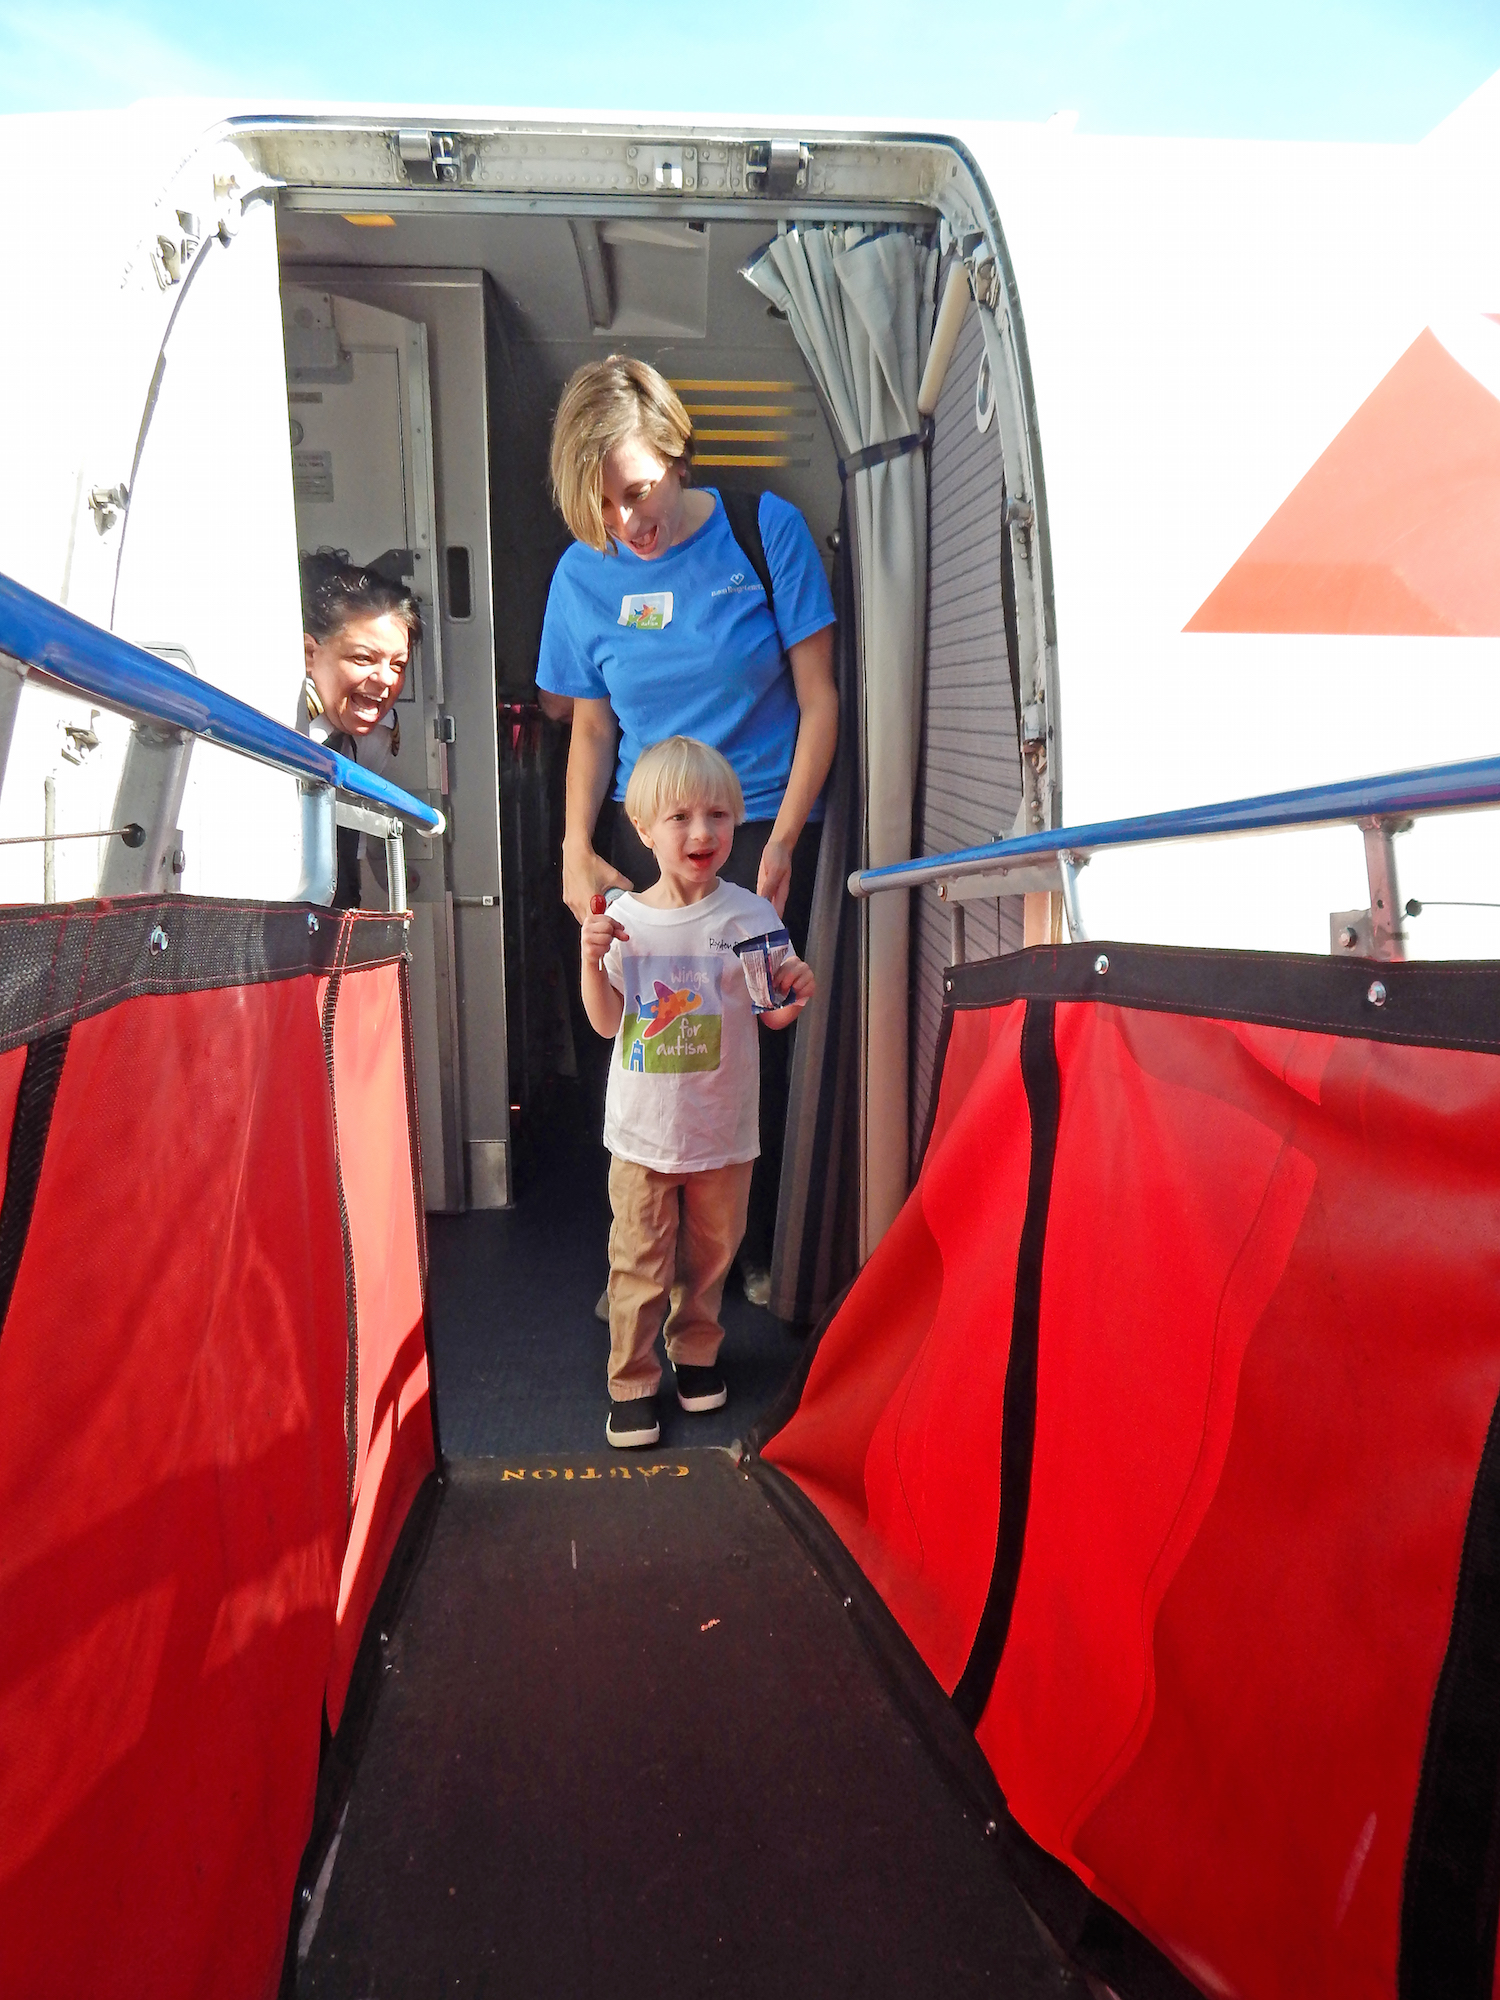 A young passenger-in-training exits the airplane during the Wings for Autism event in May.